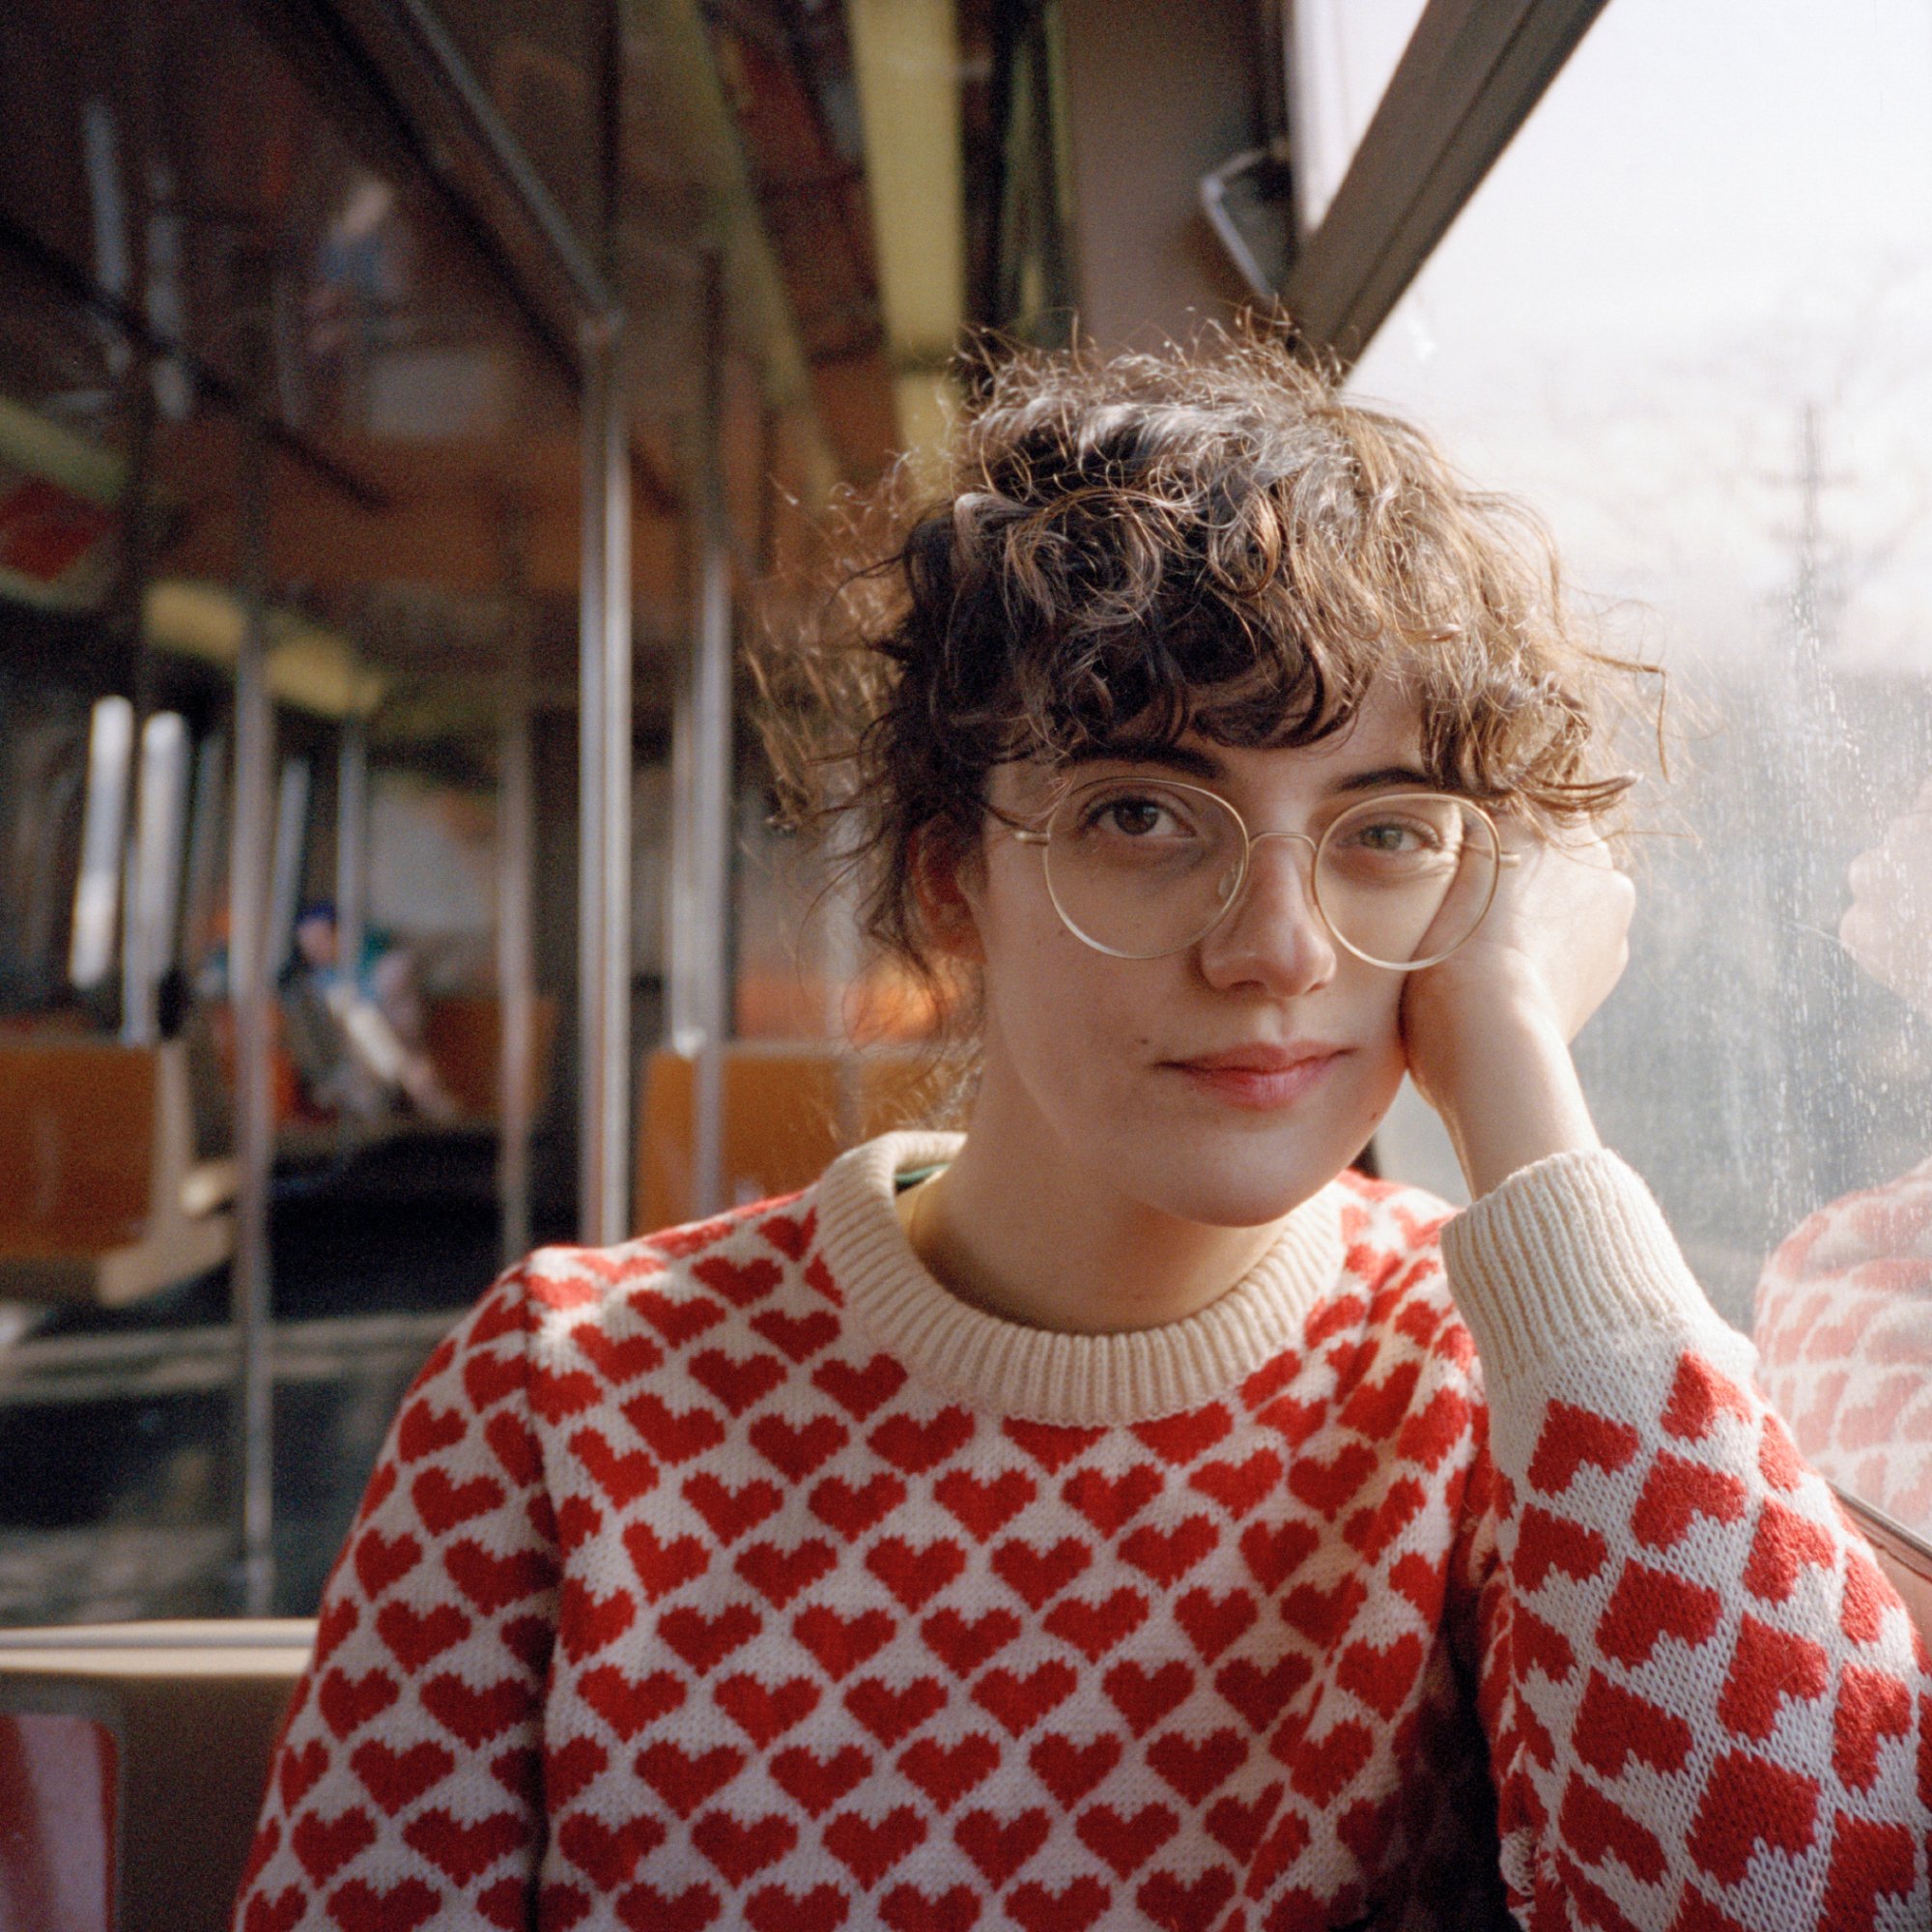 A portrait of a person with light skin, dark curly hair, glasses, sweater, sitting in a train car. Their left hand is holding their head up and pulling their cheek back into a very slight smile.